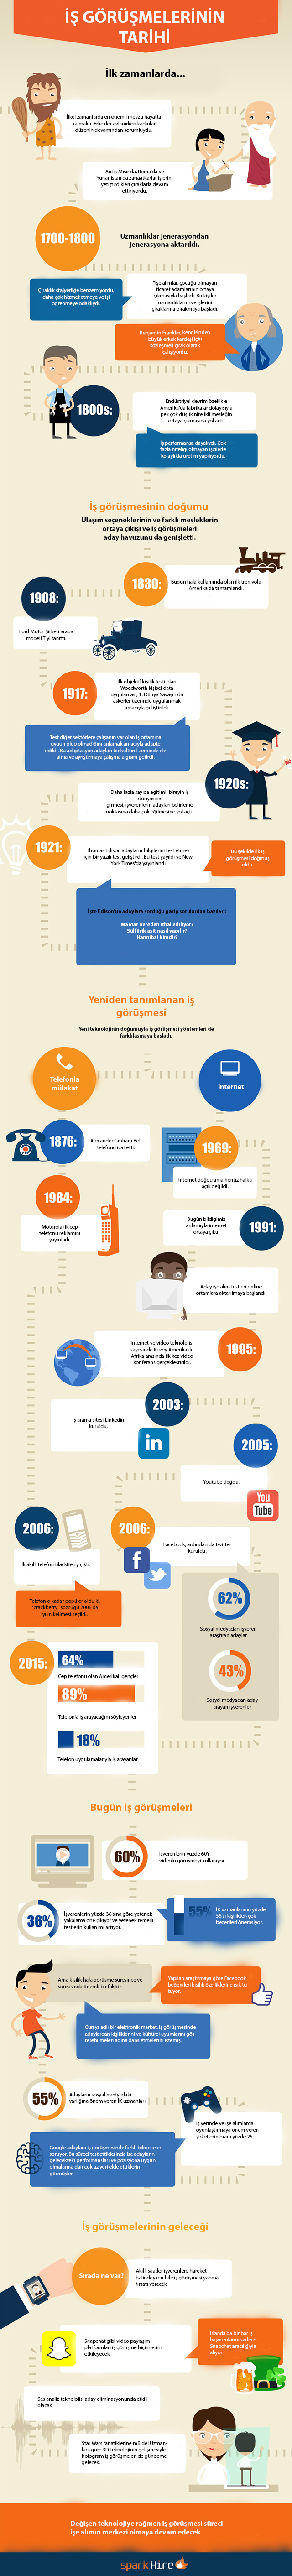 The-Evolution-of-the-Job-Interview-Infographic